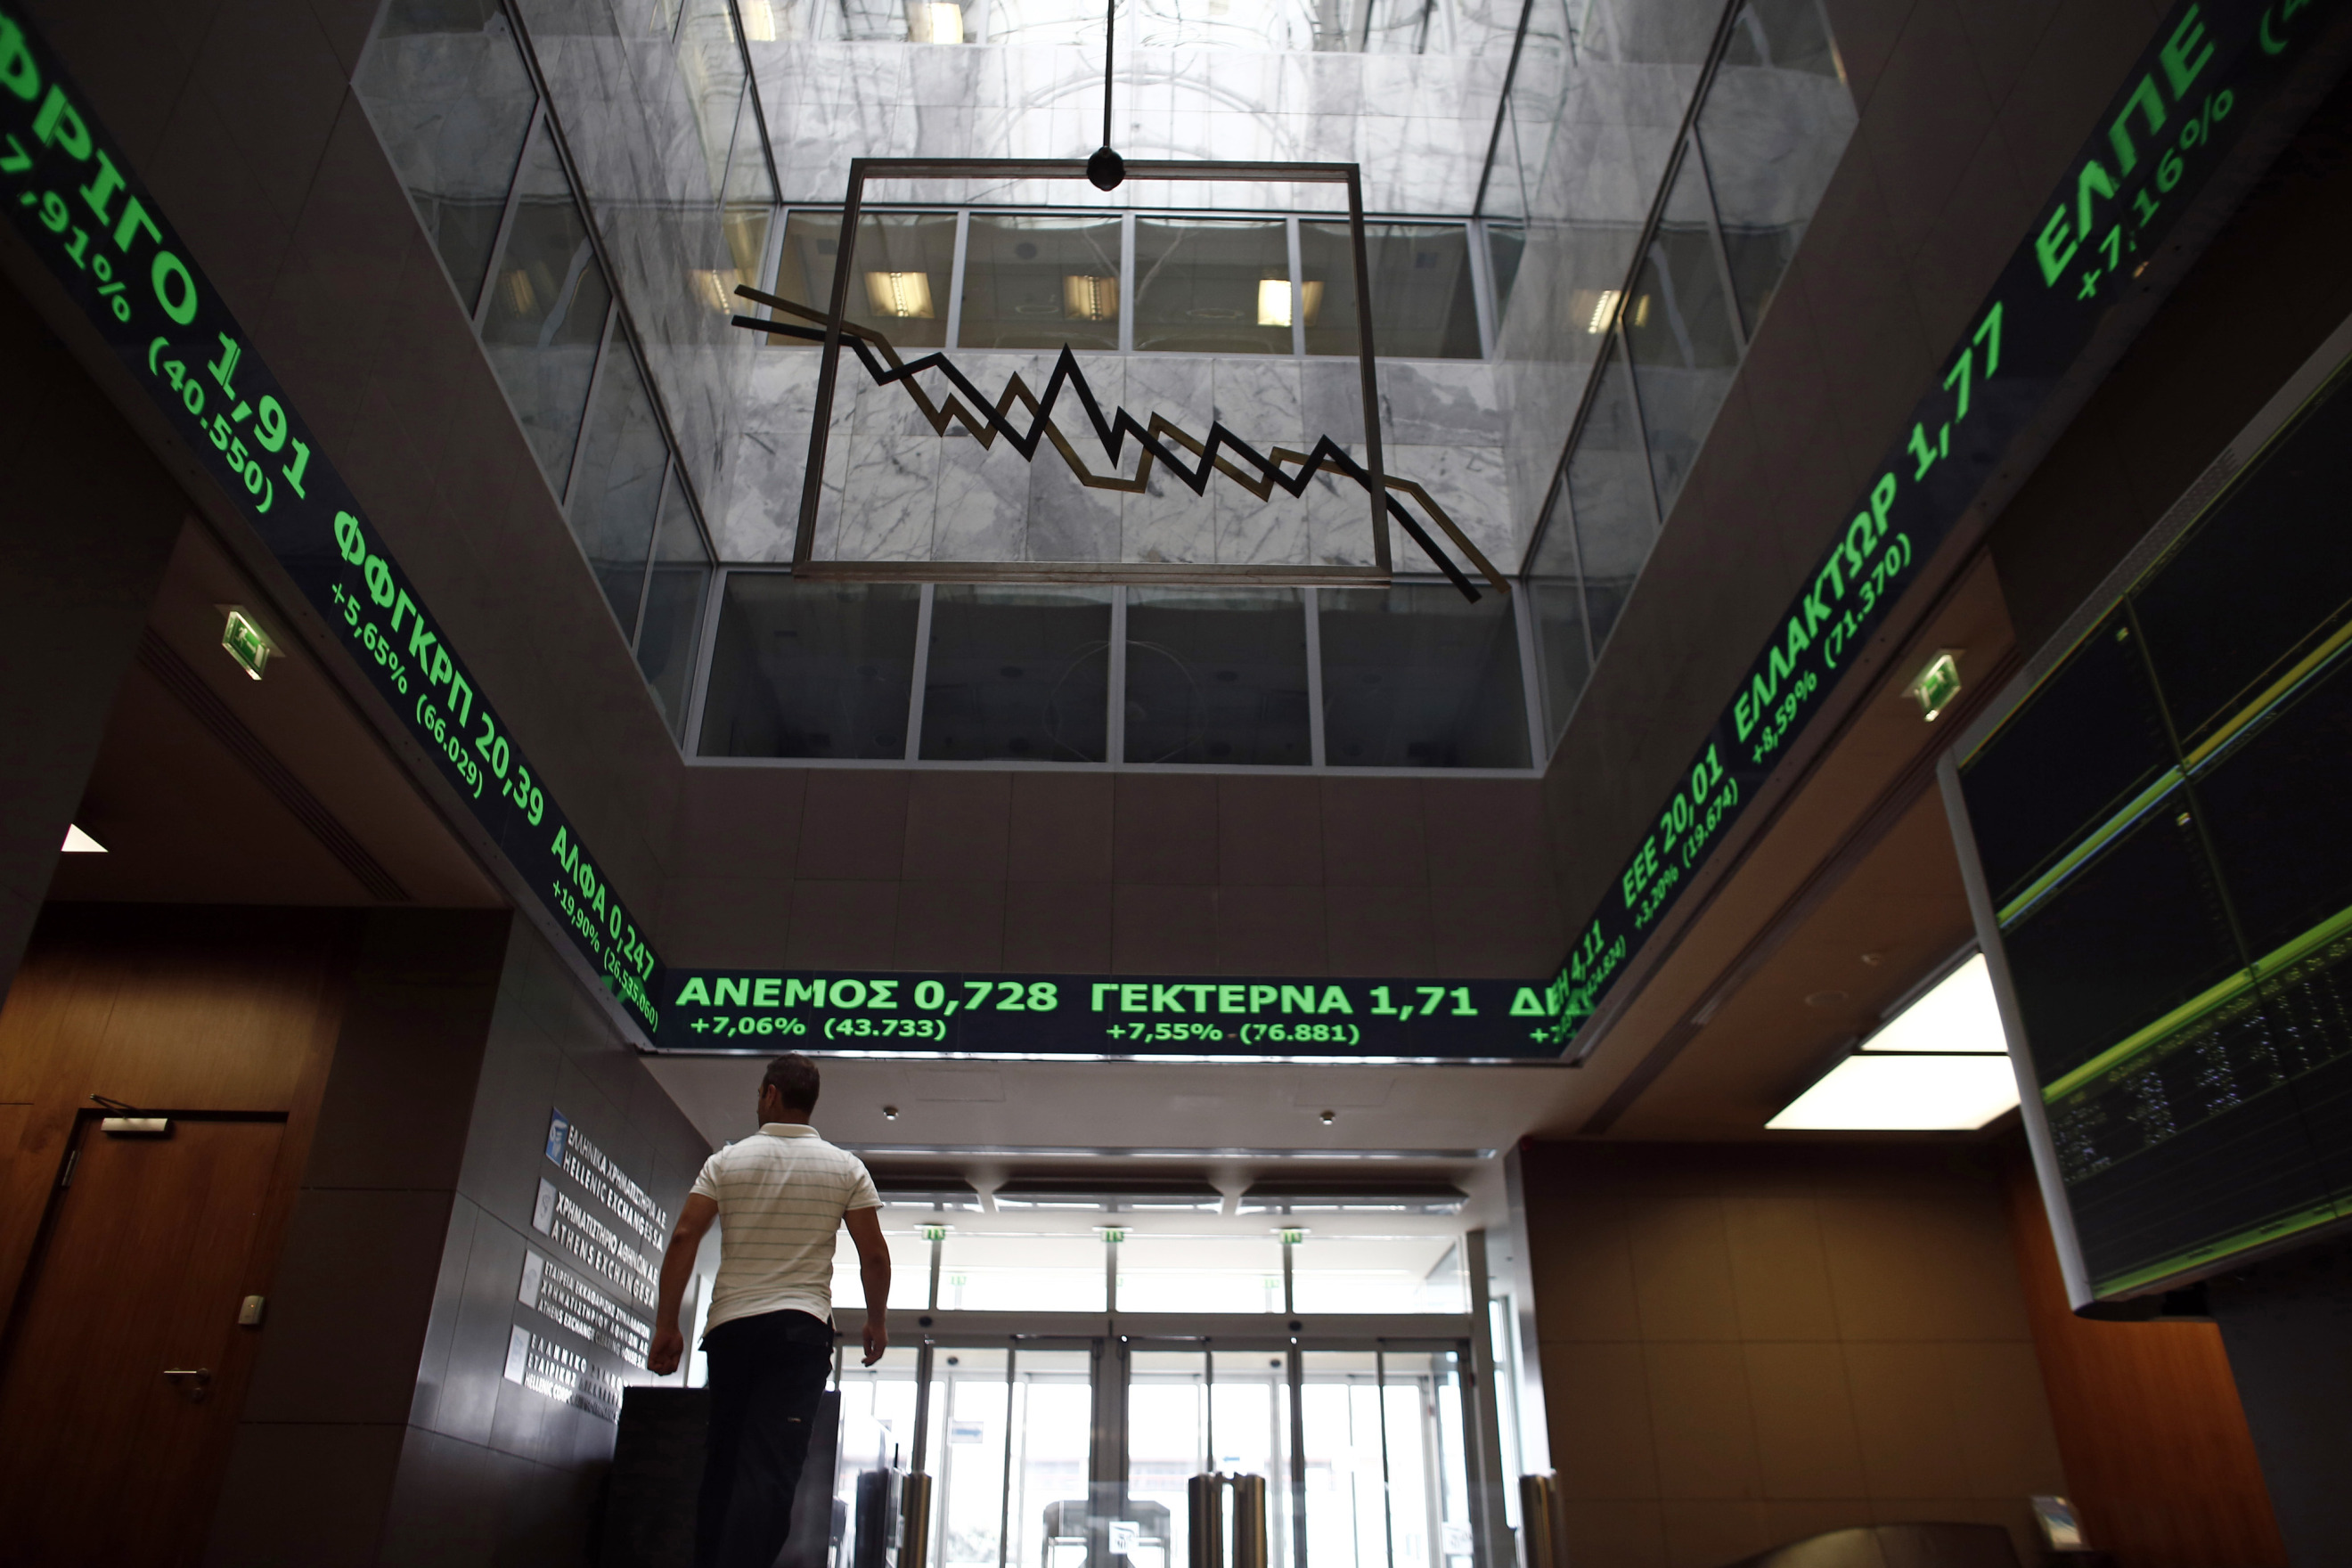 A visitor passes beneath a stock price ticker screen inside the Hellenic stock exchange in Athens.